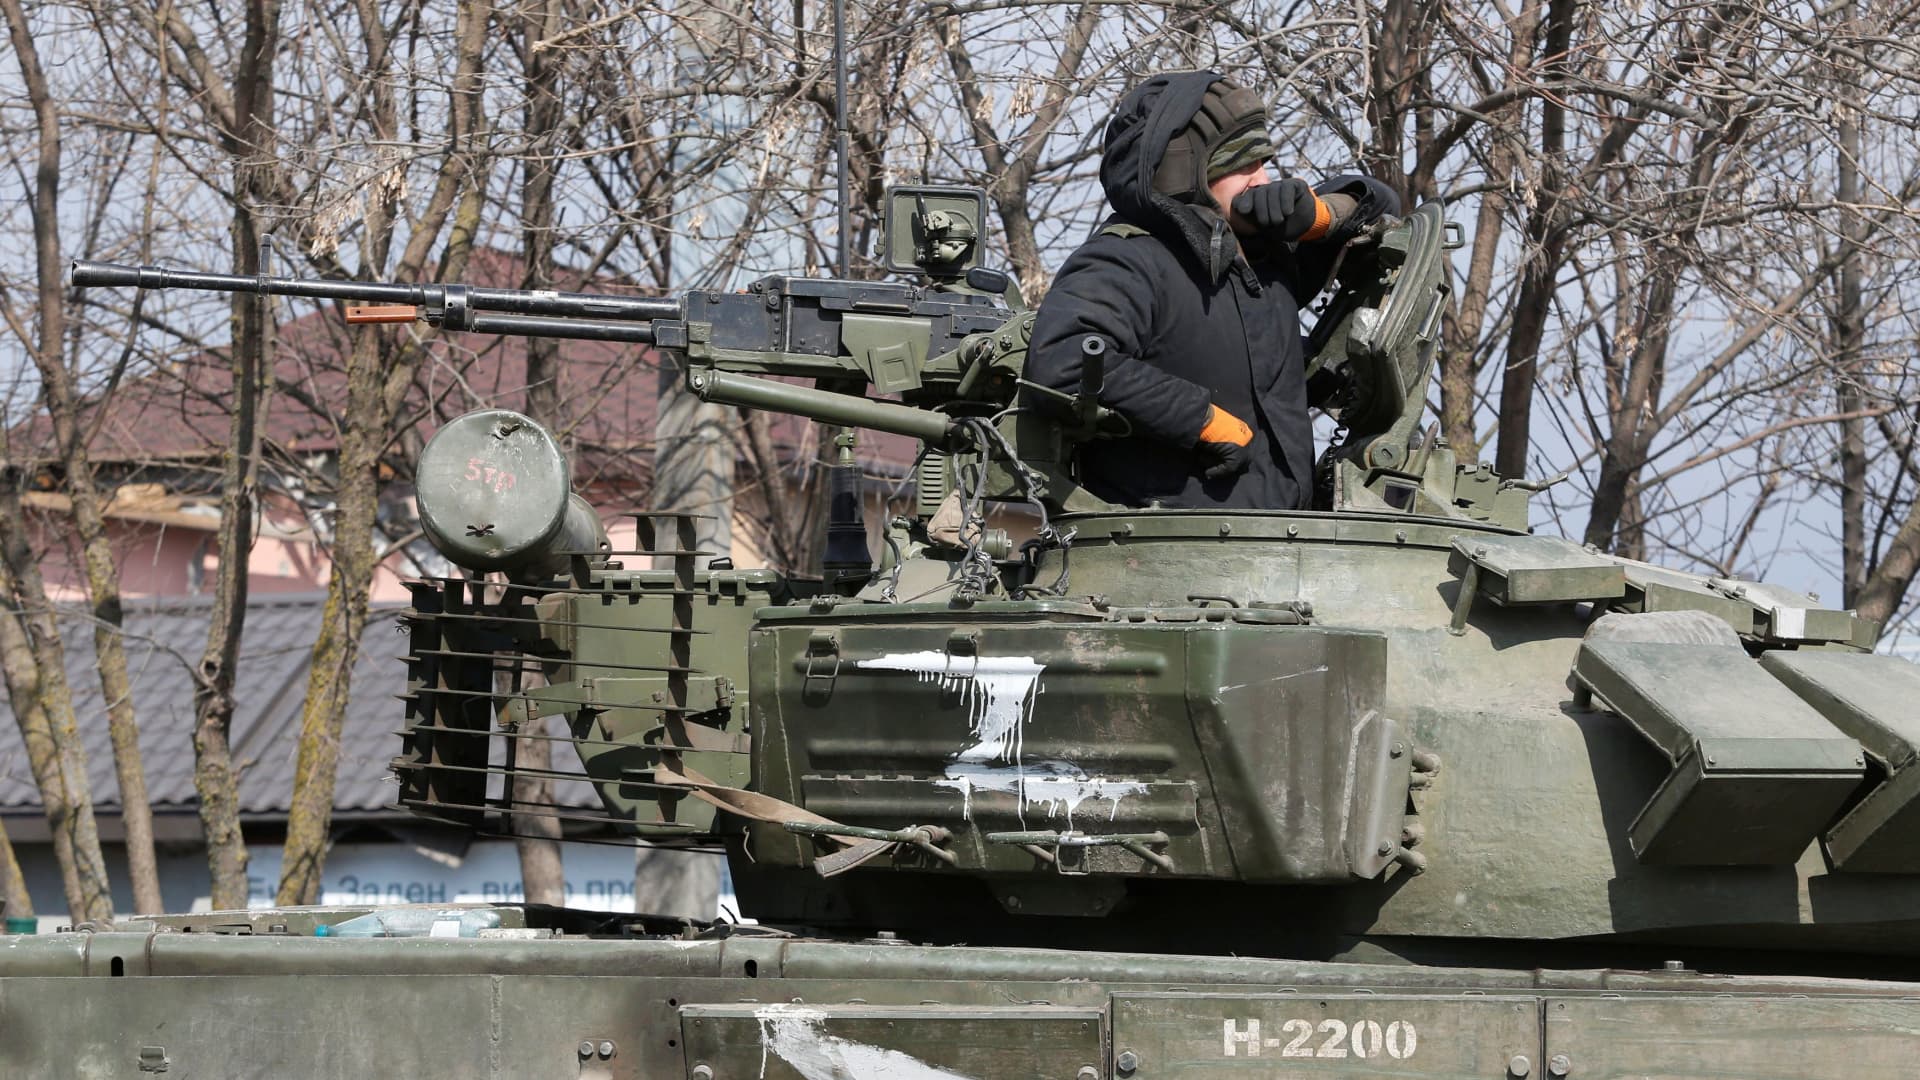 A service member of pro-Russian troops in uniform without insignia is seen atop of a tank during Ukraine-Russia conflict in the besieged southern port city of Mariupol, Ukraine March 18, 2022.